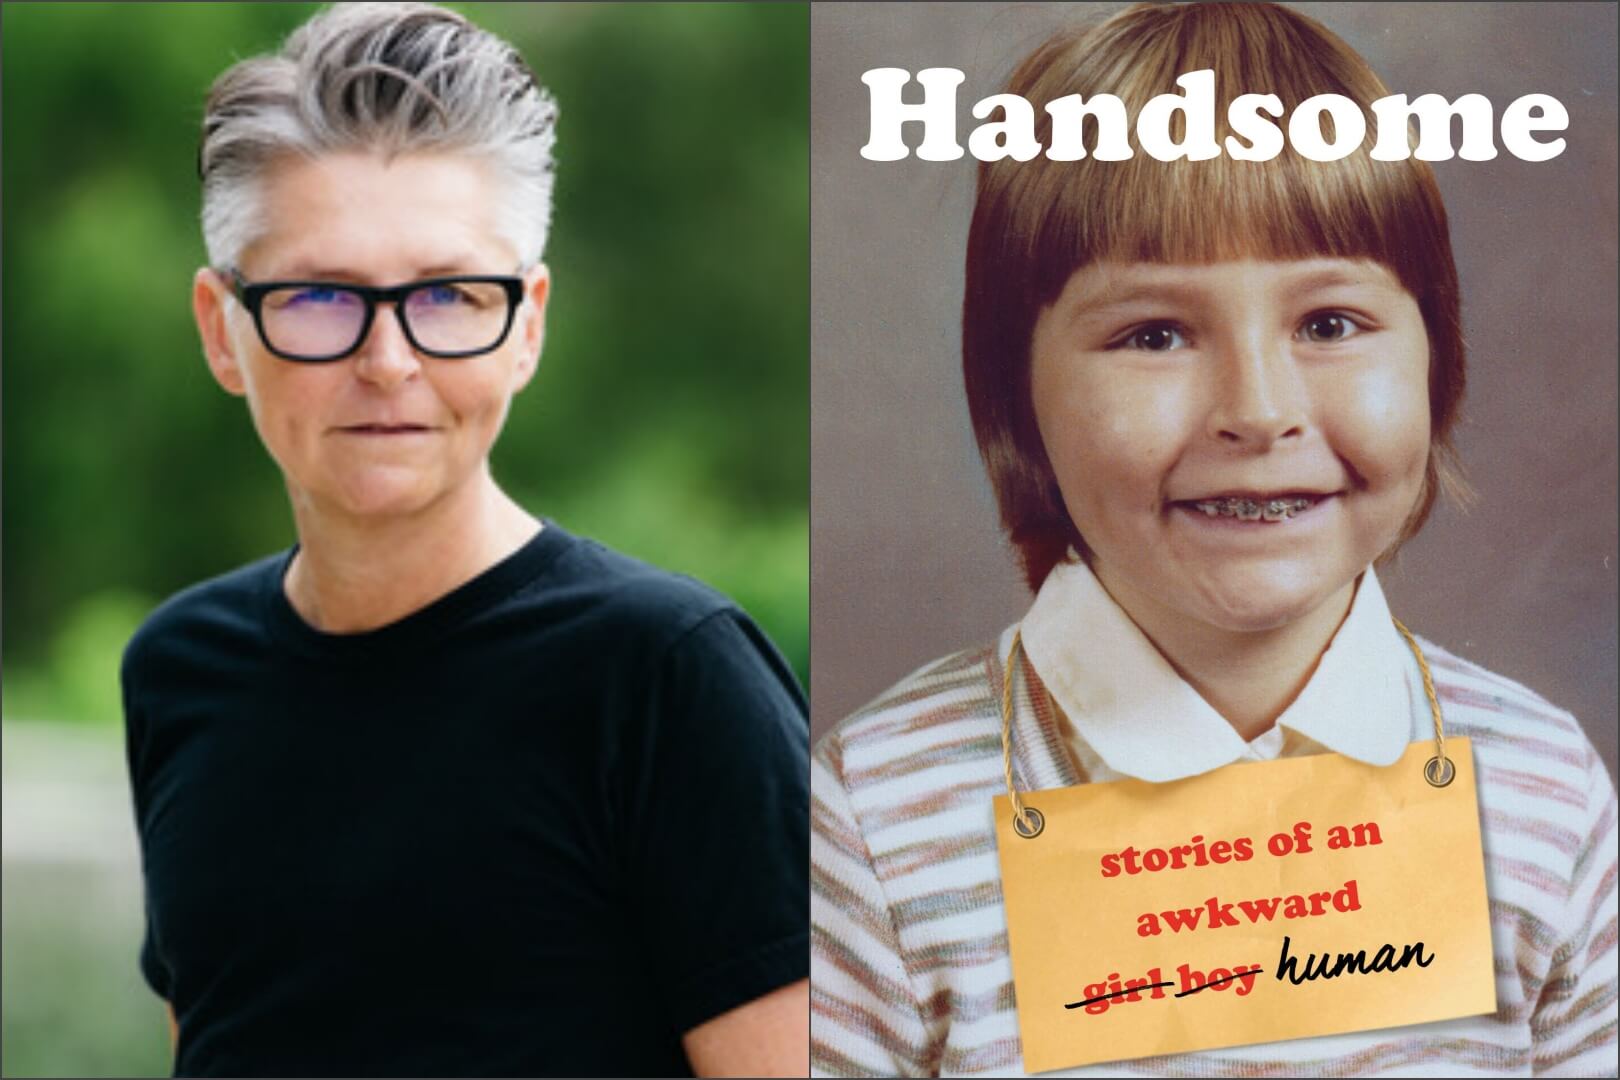 Q&A with Holly Lorka, Author of Handsome: Stories of an Awkward Girl Boy Human